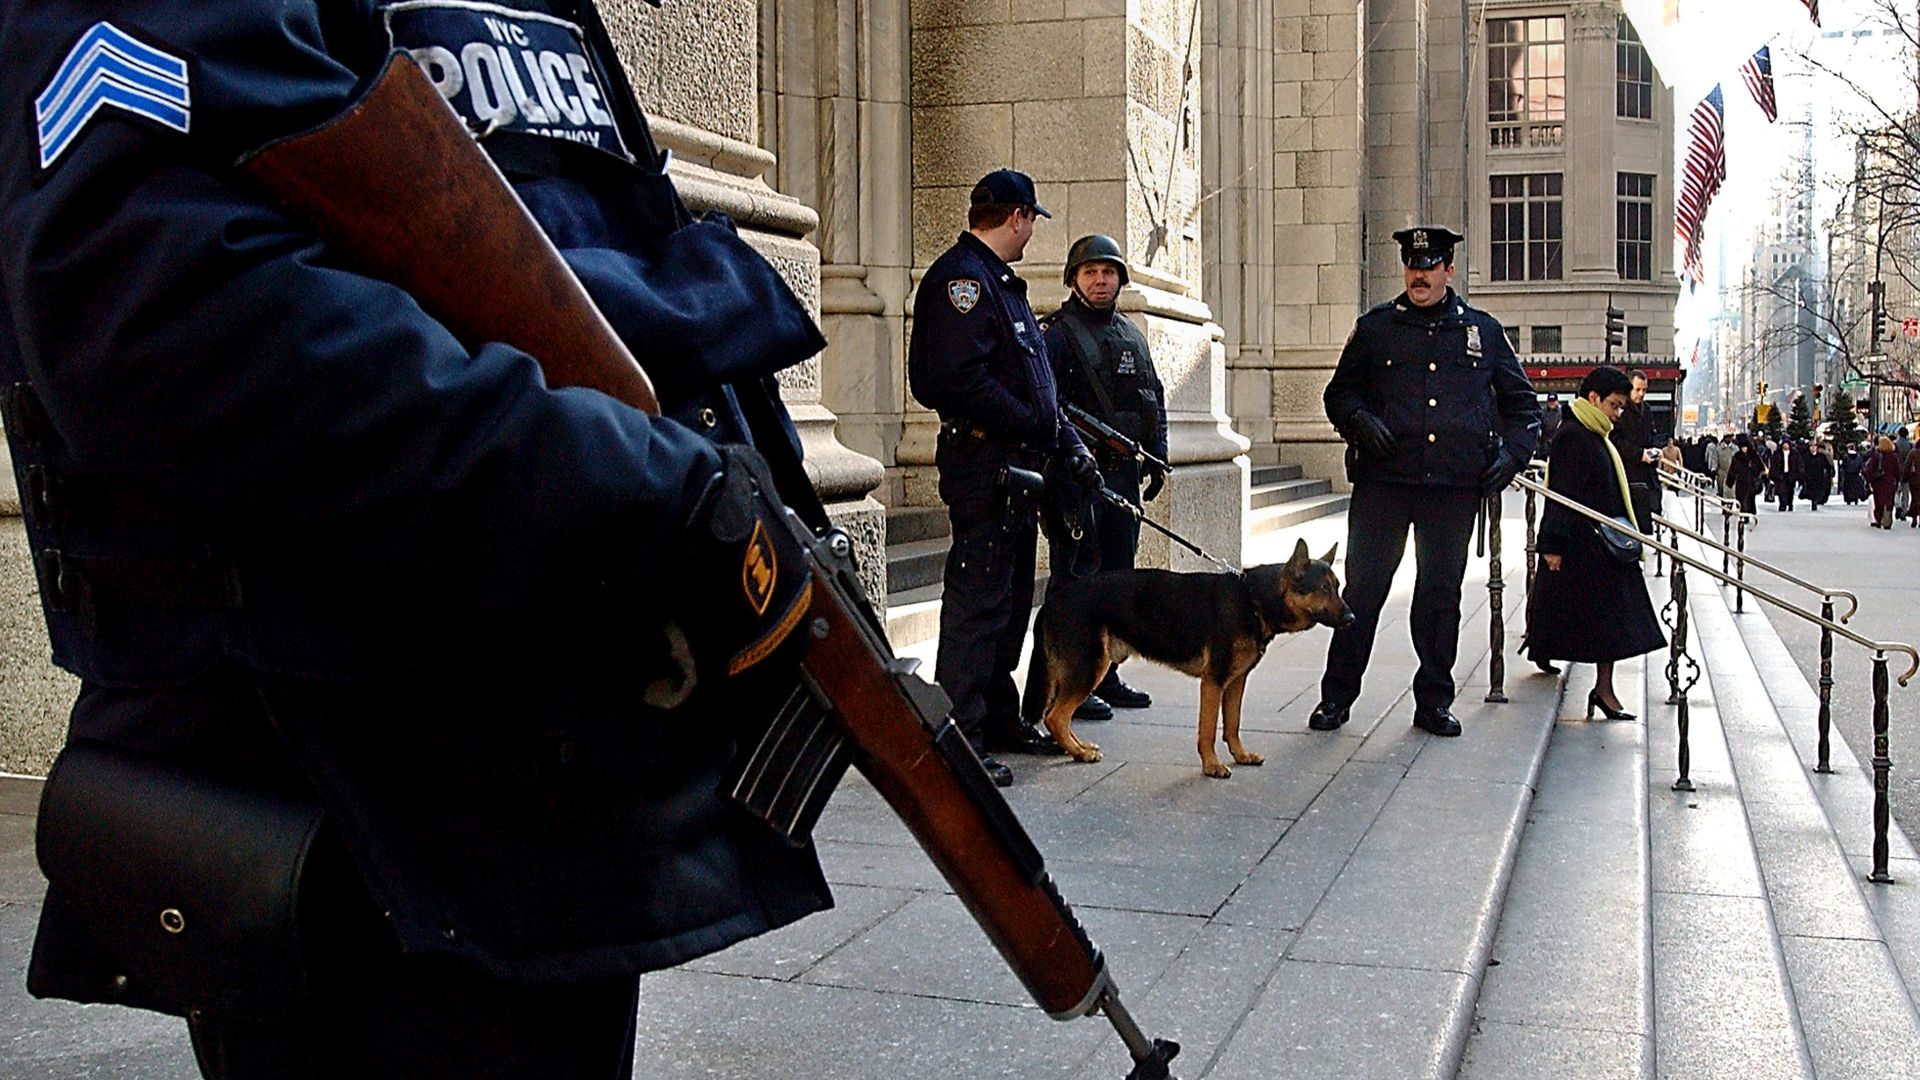 New York police officers stand guard in front of St. Patricks Cathedral February 12, 2003 in New York City. 